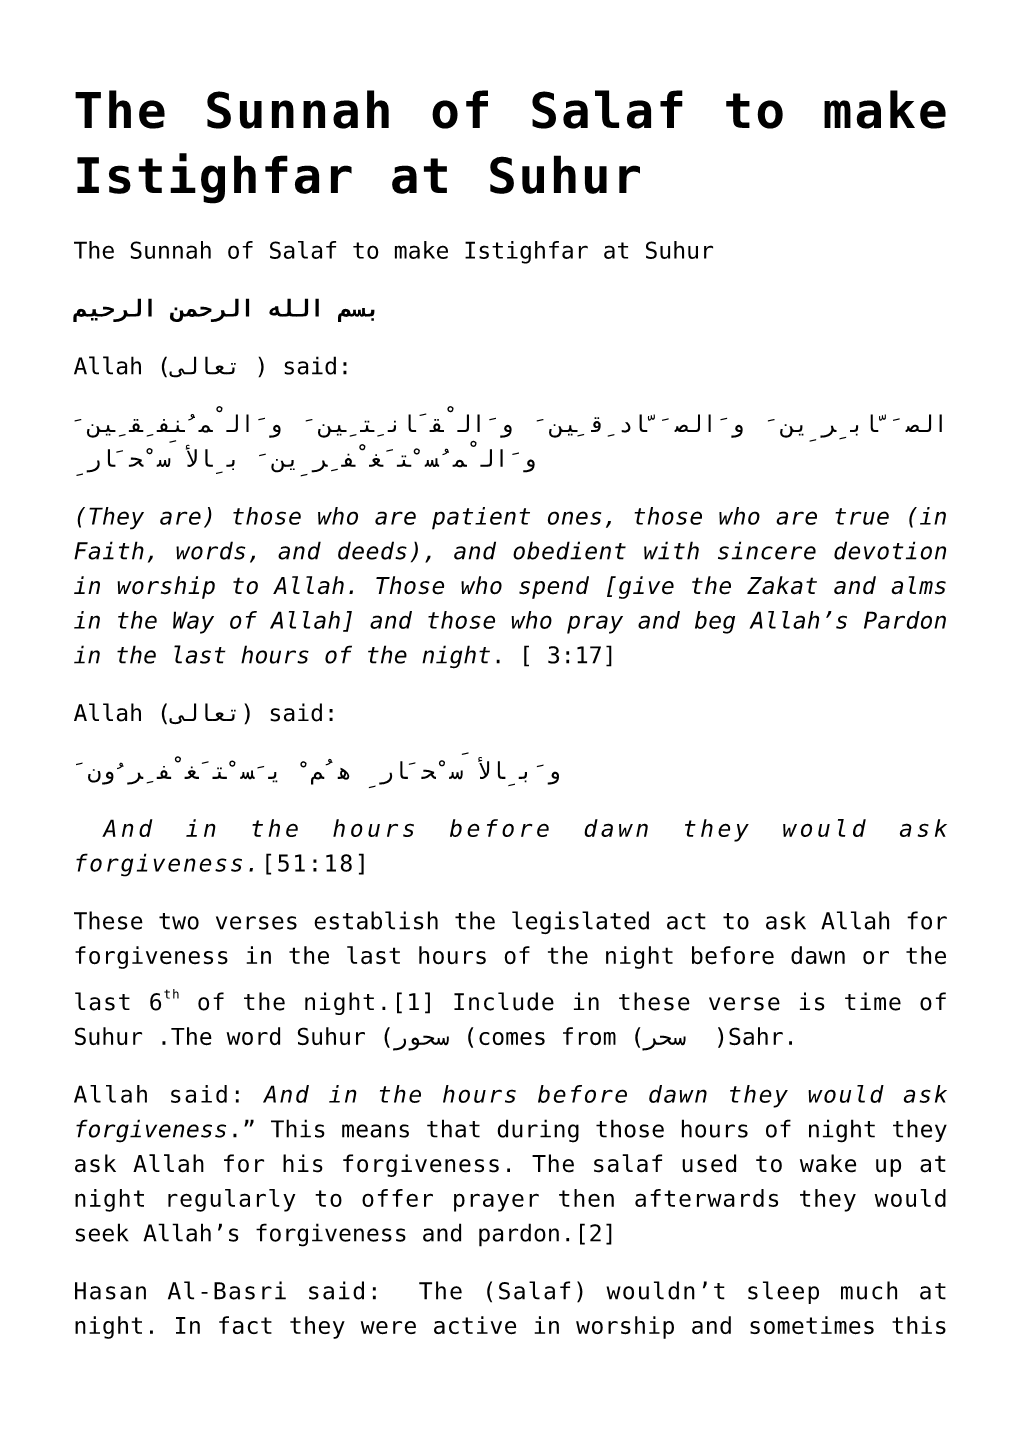 The Sunnah of Salaf to Make Istighfar at Suhur,The Weakness in The